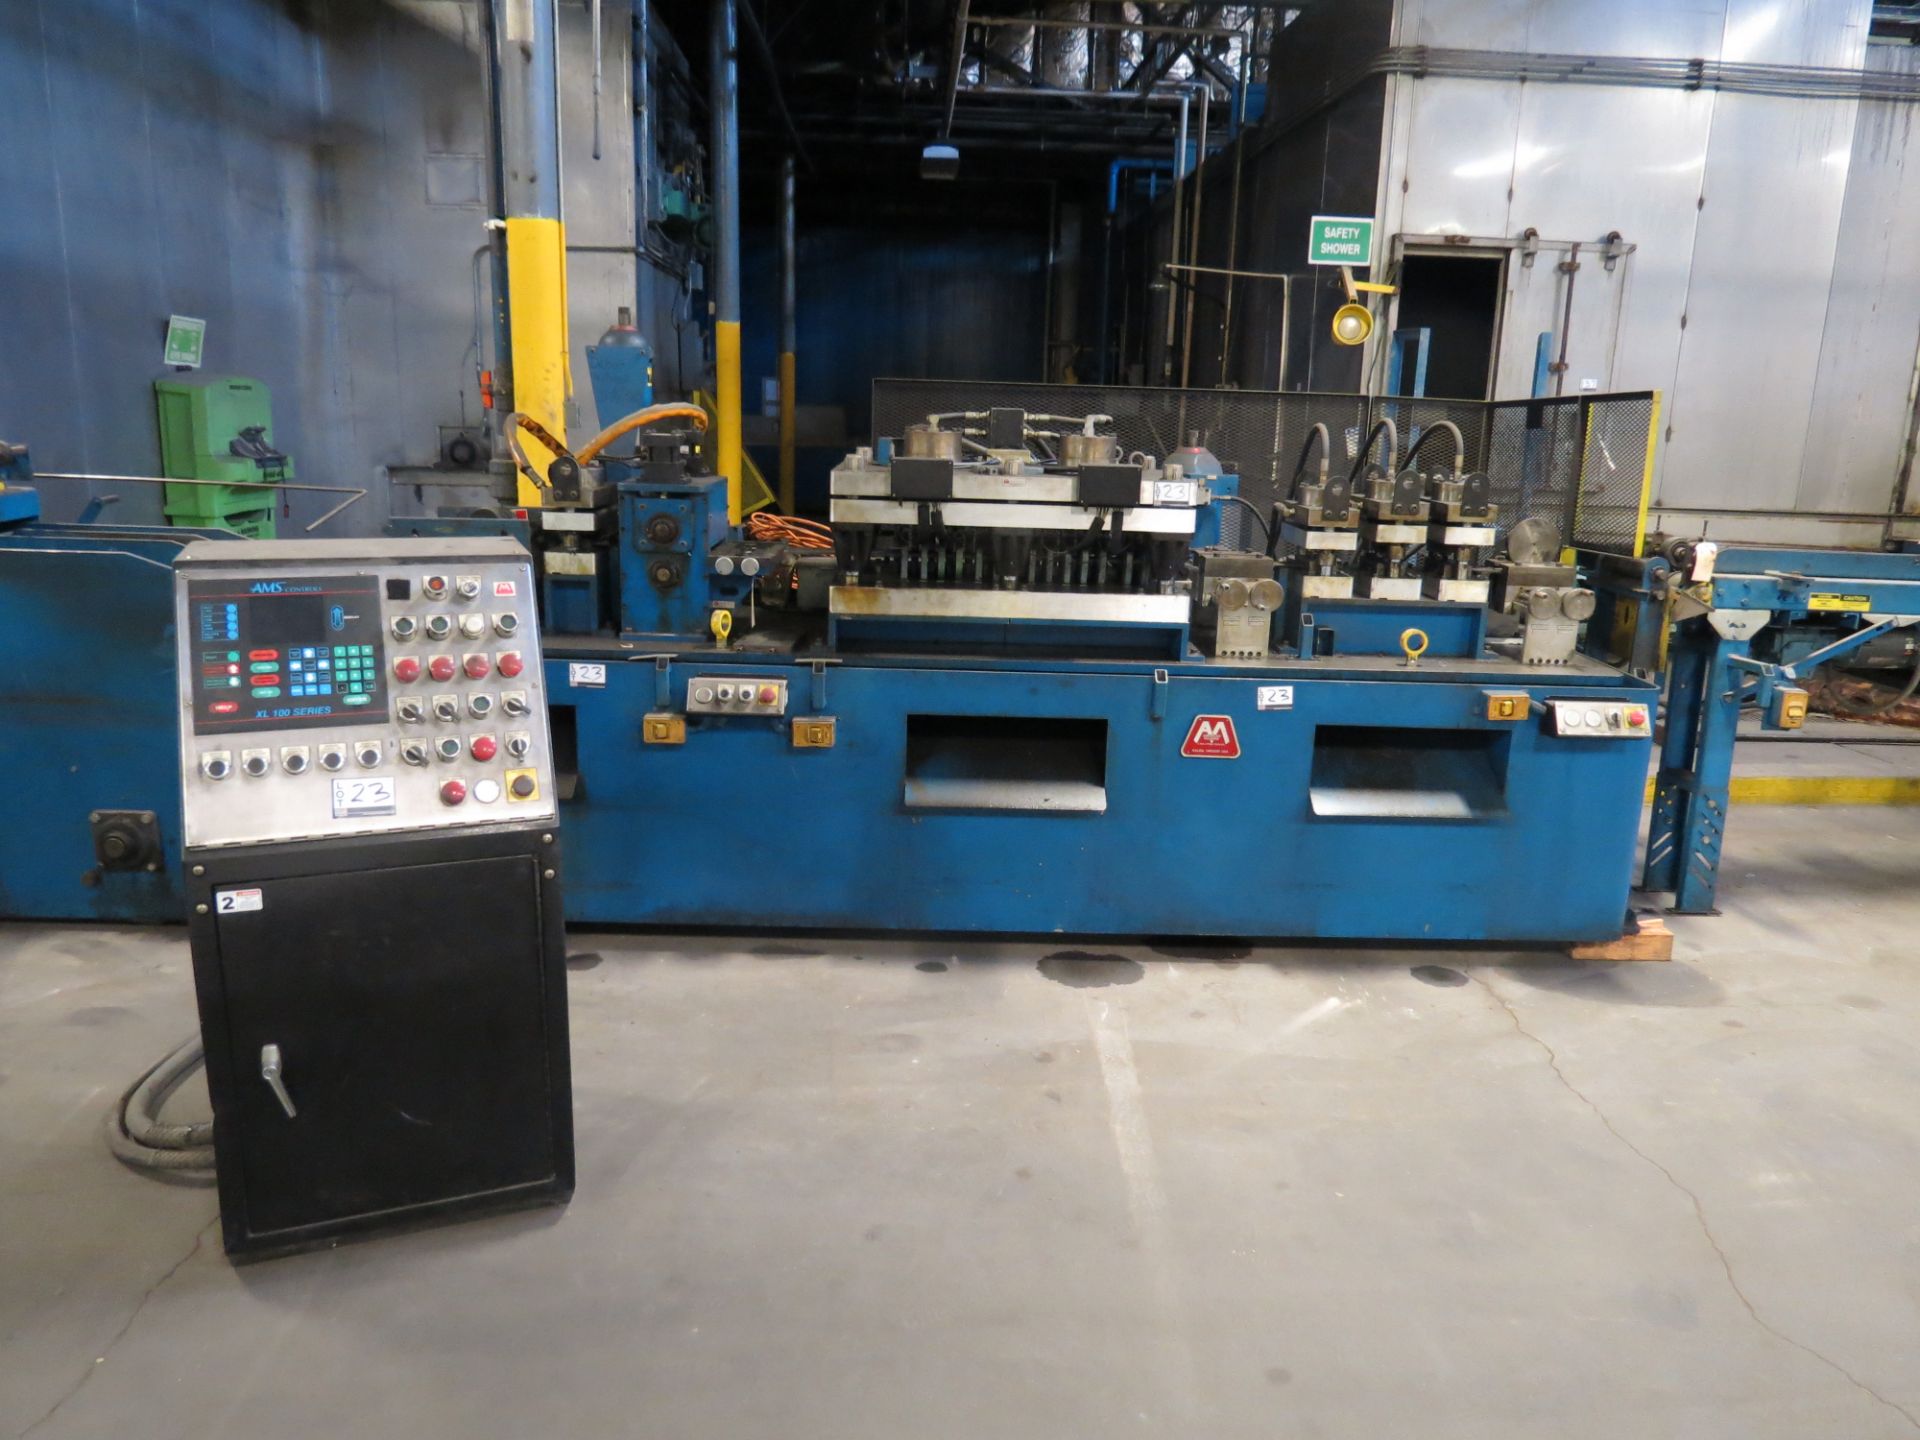 AMS Material Straightener with hyd shear & punches, XL 100 Controls - Image 2 of 7